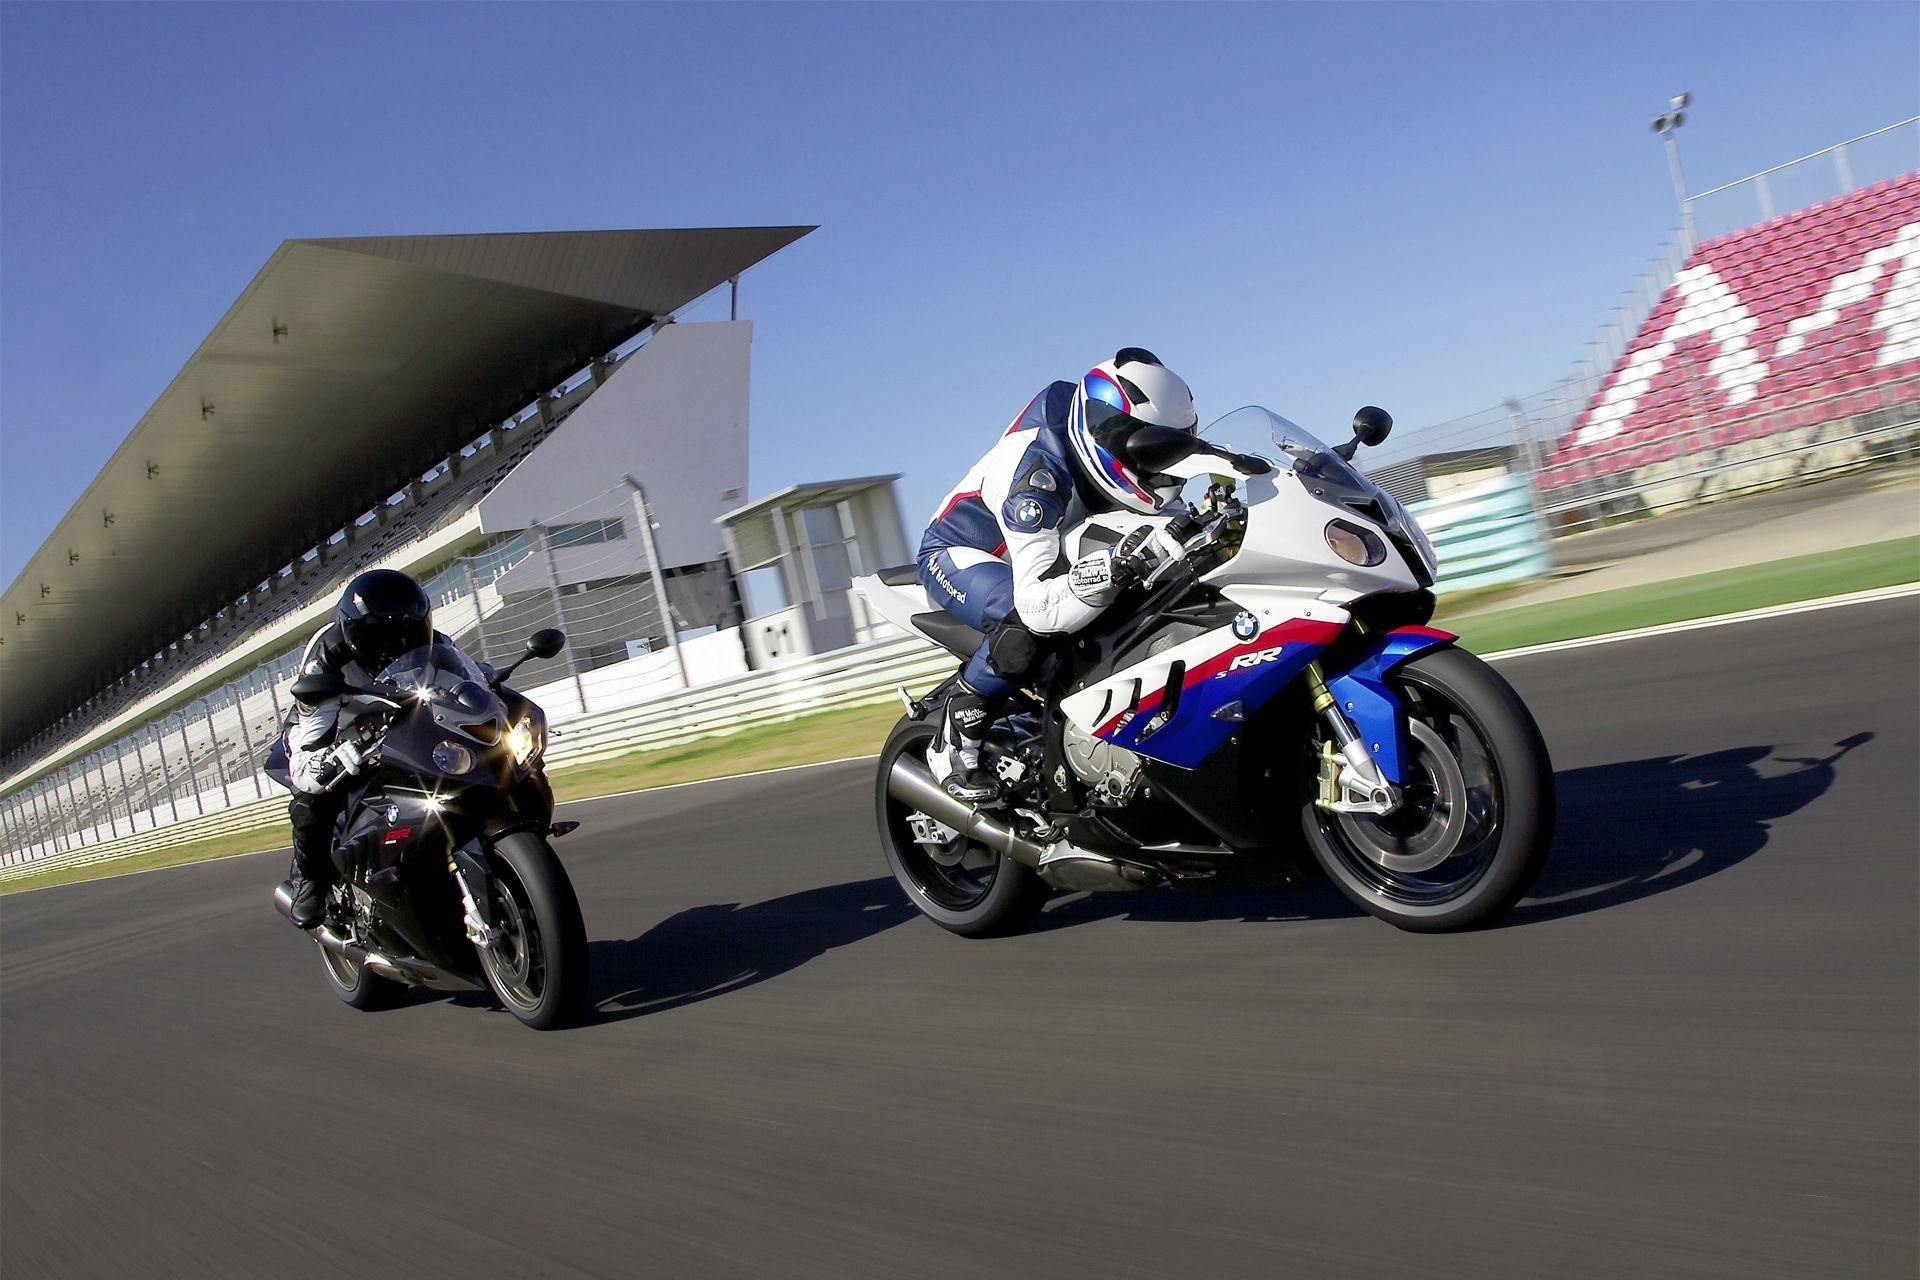 BMW S1000RR picture # 71119. BMW photo gallery